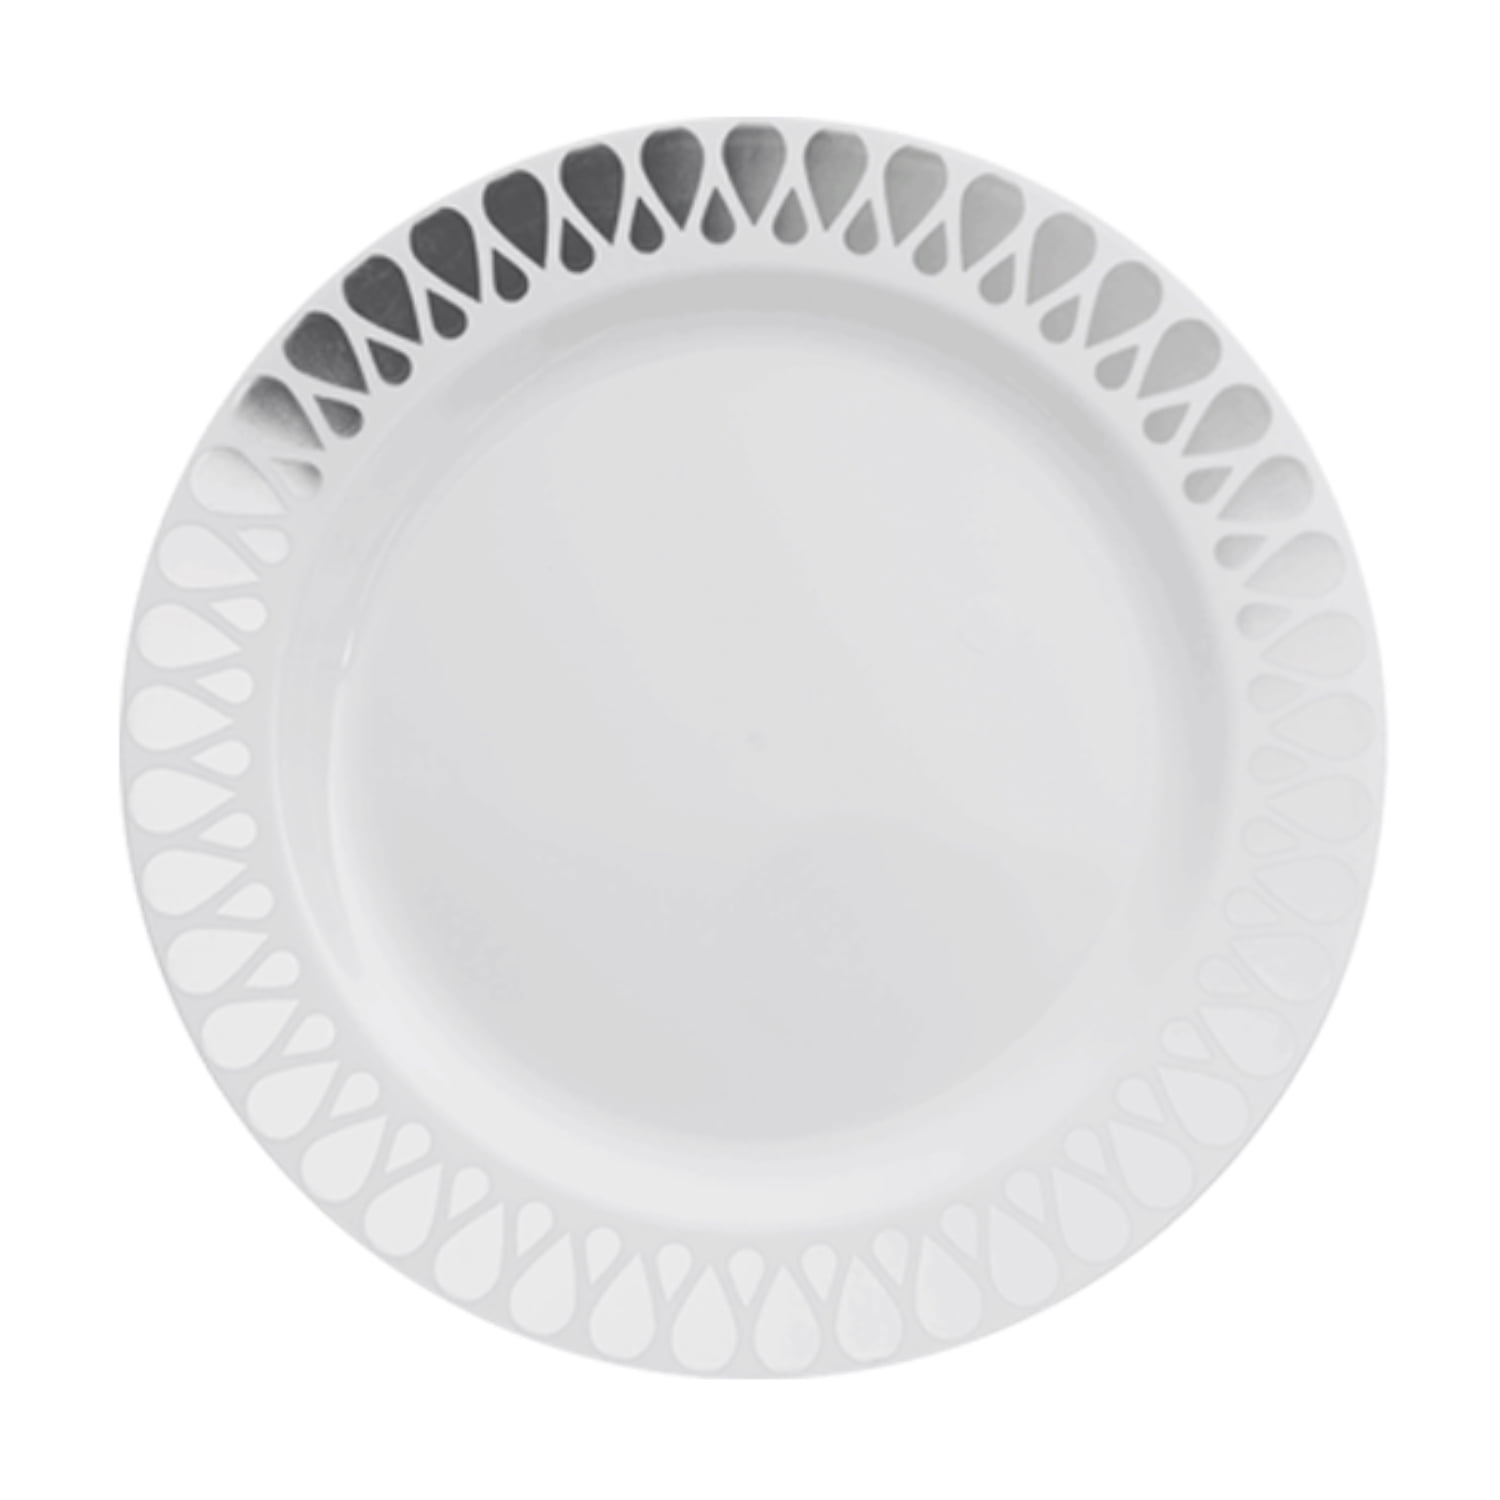 80 Assorted Round Scroll Design Luxury Dinner Party Clear Plastic Plate Set 